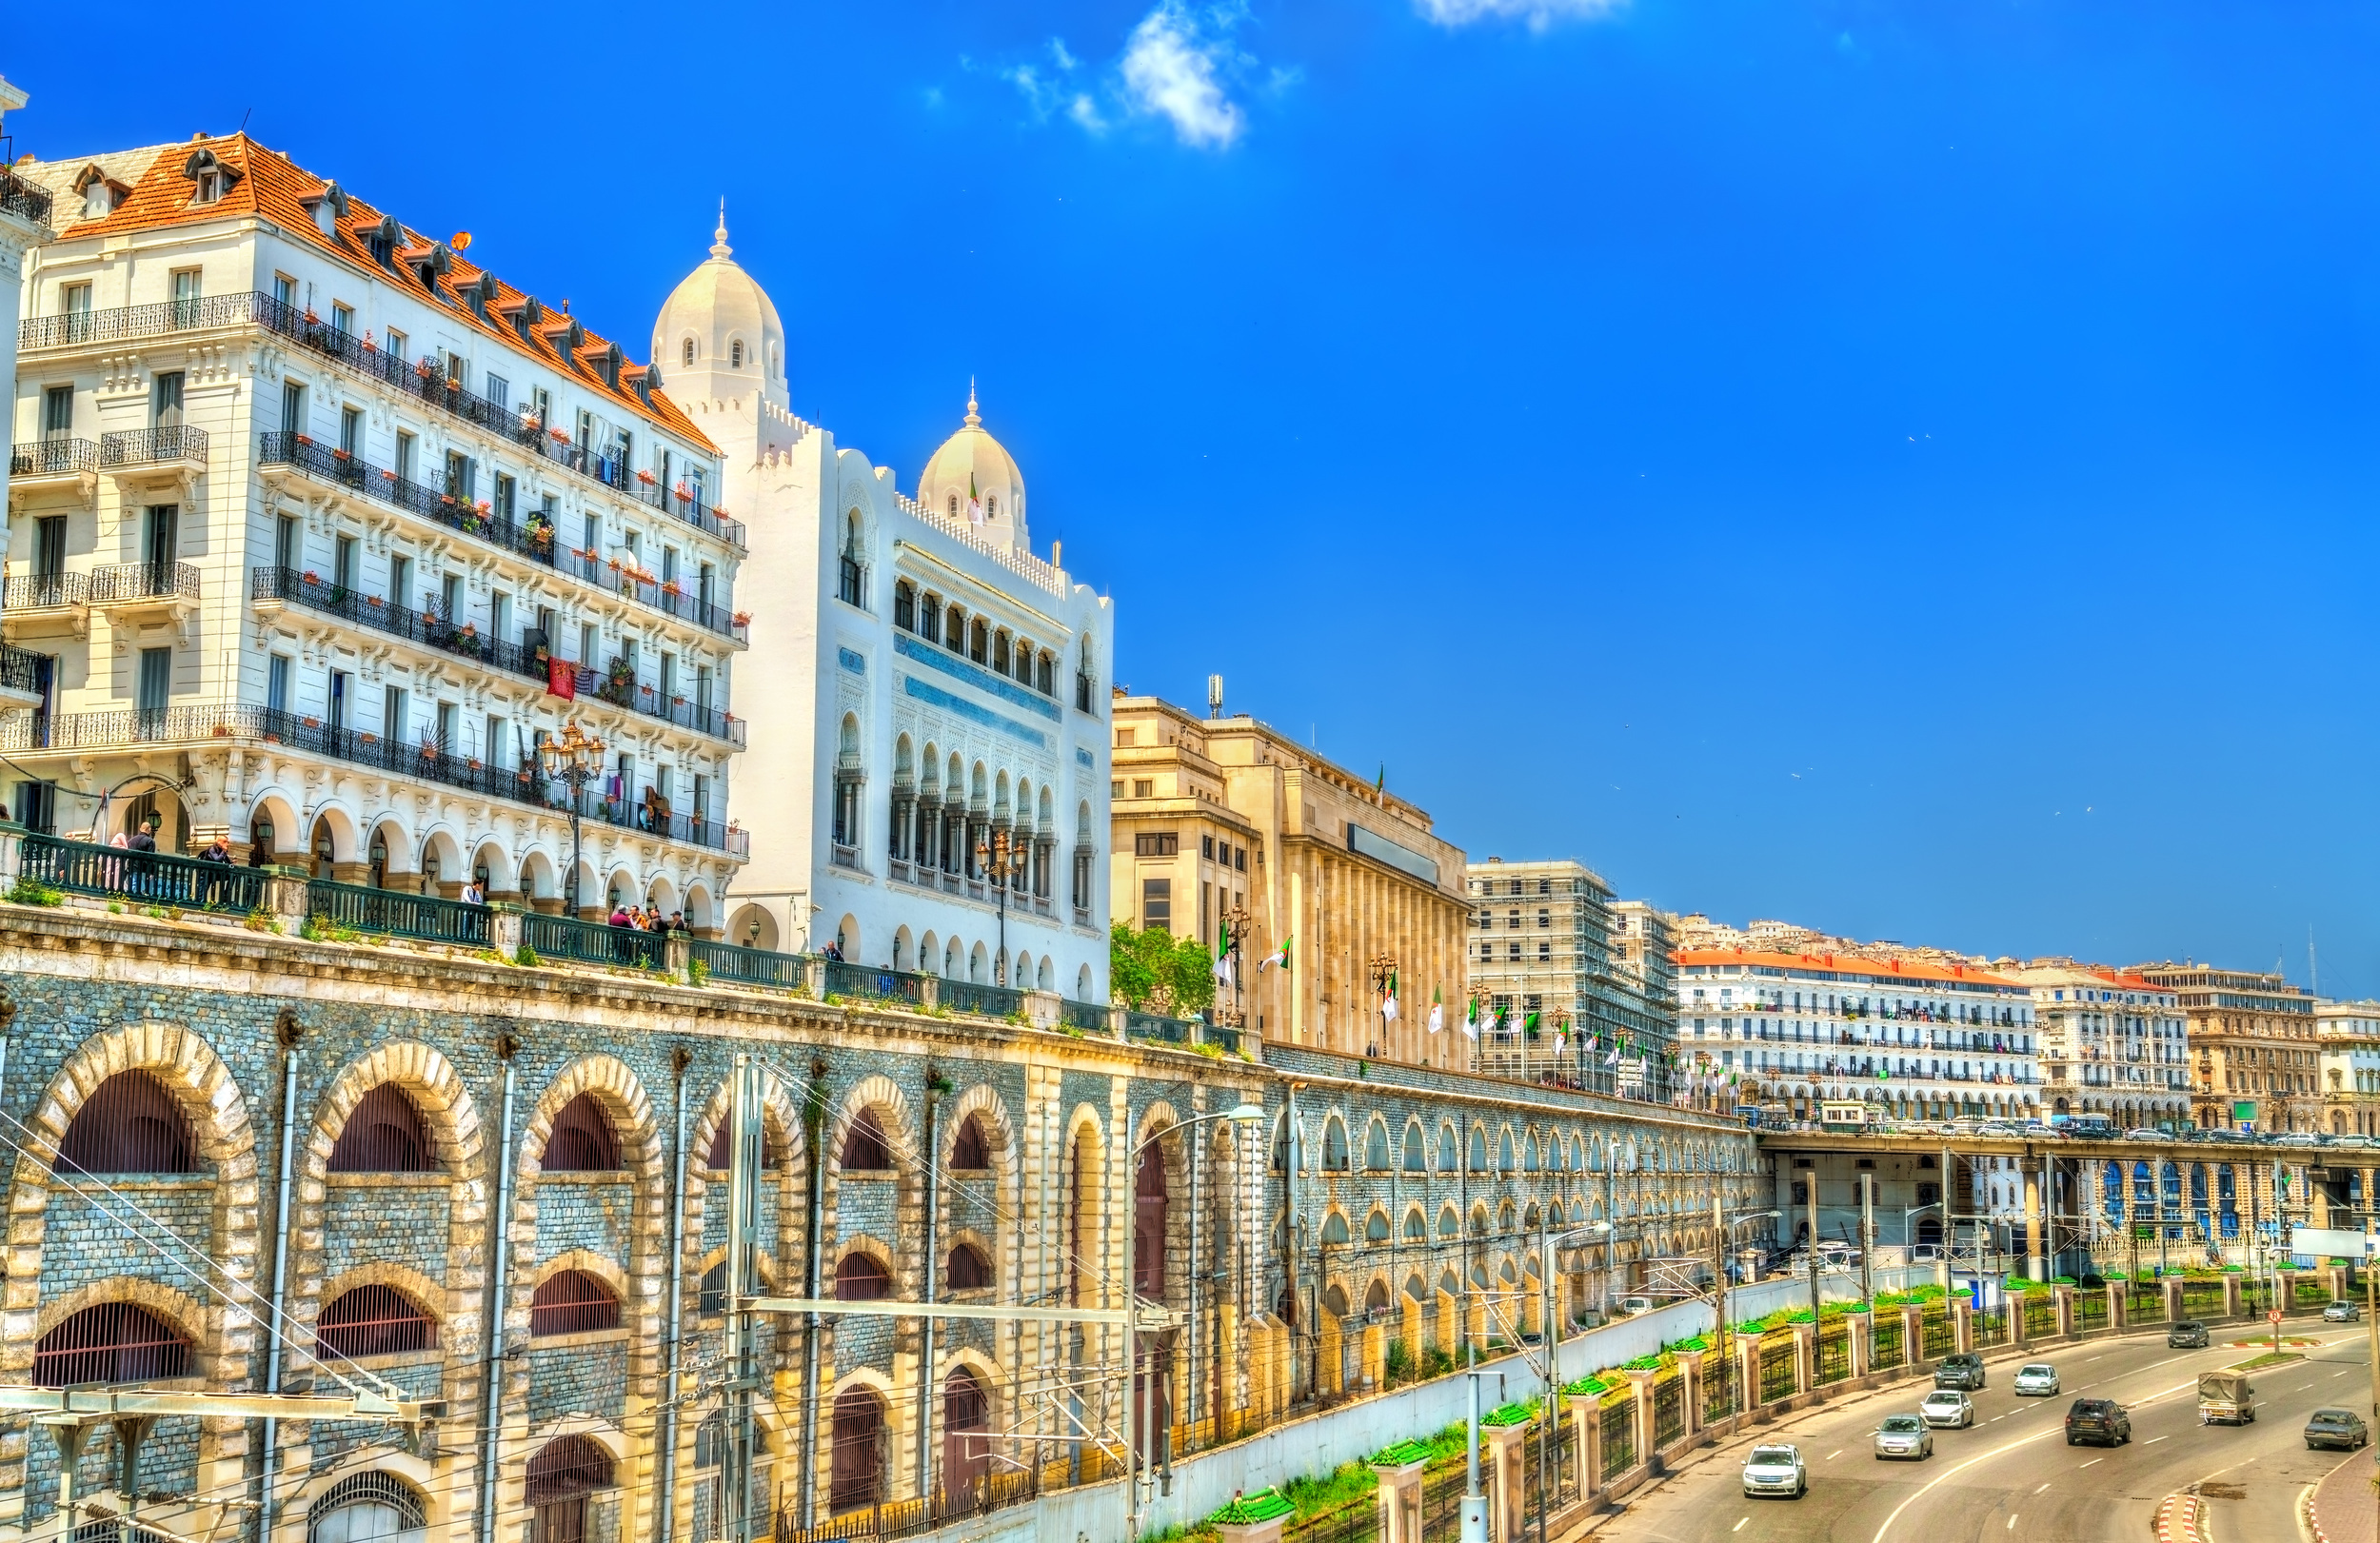 <p>Algeria’s official languages are Arabic and Berber, but French is also commonly understood. While not as widely used as in neighboring Morocco, it will be your best bet if you don’t speak one of the official languages. </p><p>You may also like: <a href='https://www.yardbarker.com/lifestyle/articles/too_sweet_24_of_the_oldest_candy_bars_still_available_121923/s1__39111177'>Too sweet: 24 of the oldest candy bars still available</a></p>